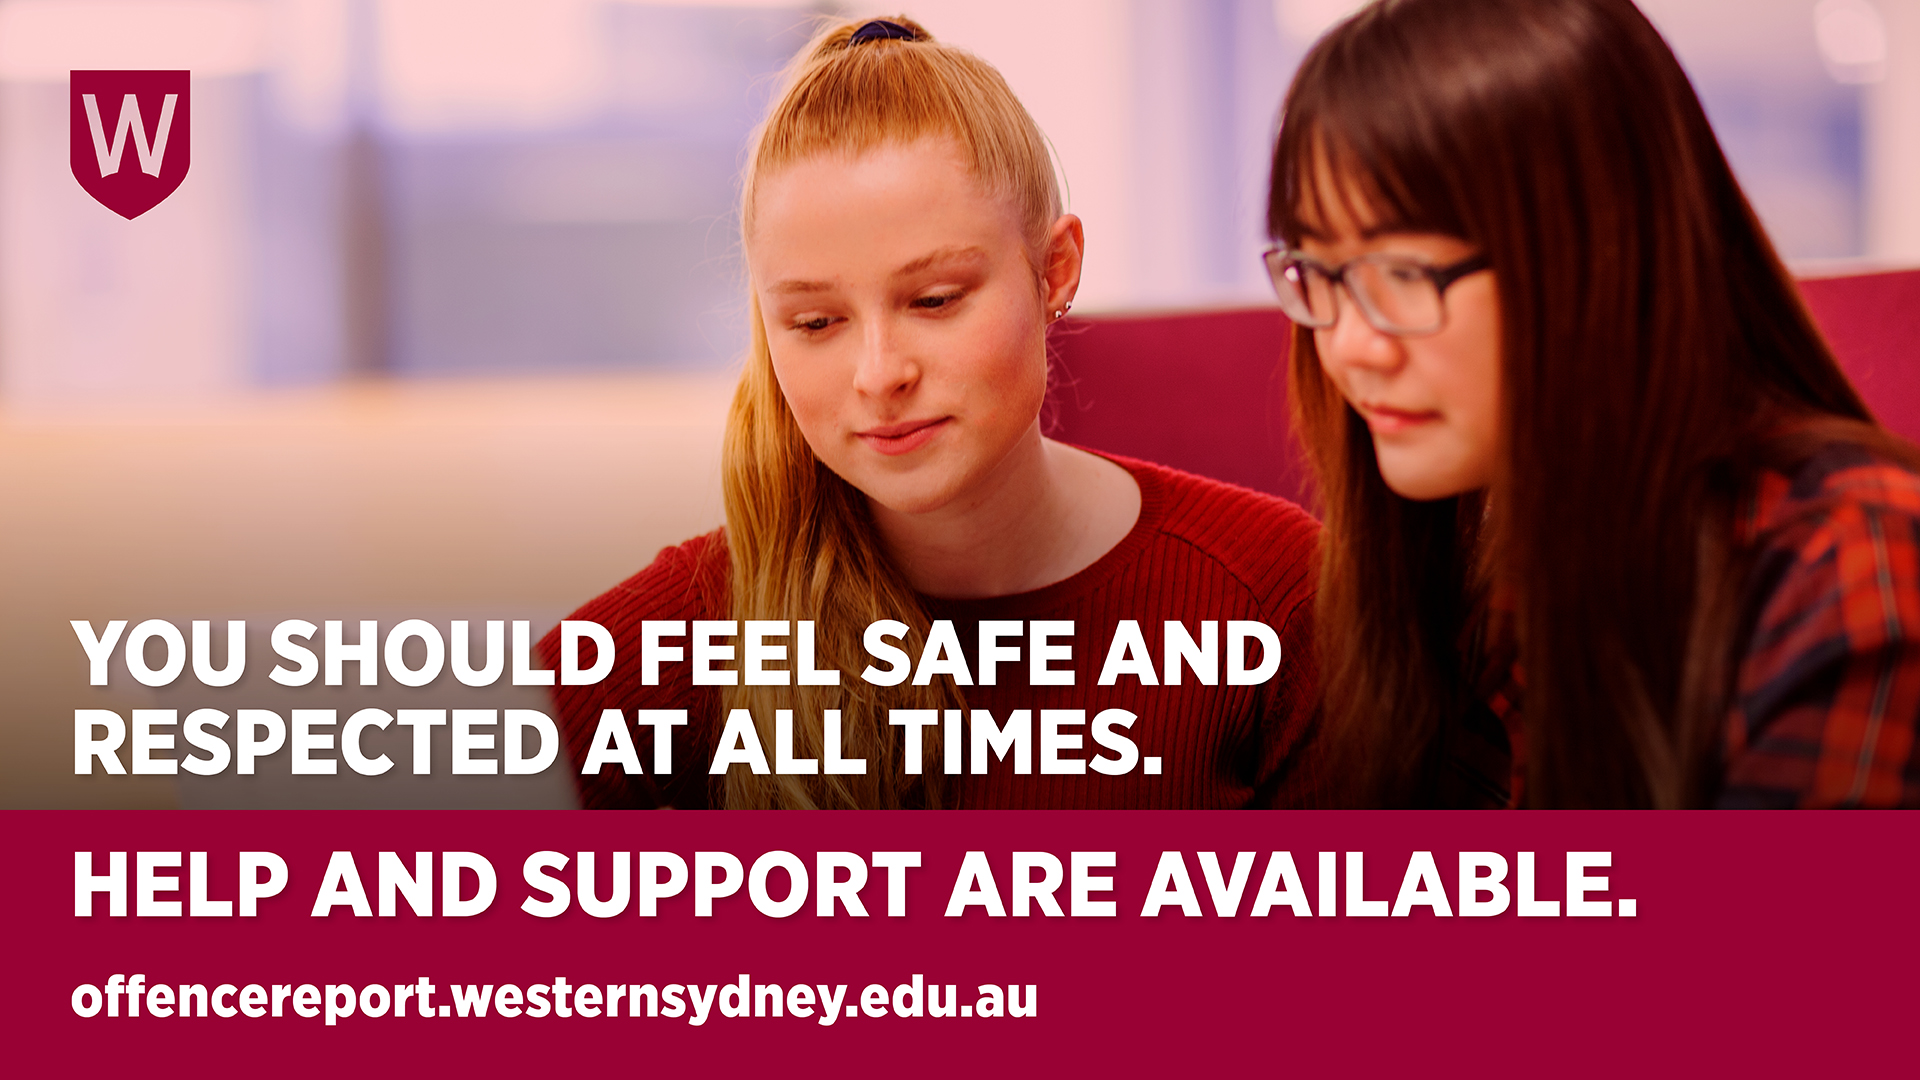 Image shows two women at a computer, the title You should feel safe and respected at all times, the subtitle Help and Support are available and the URL offencereport.westernsydney.edu.au